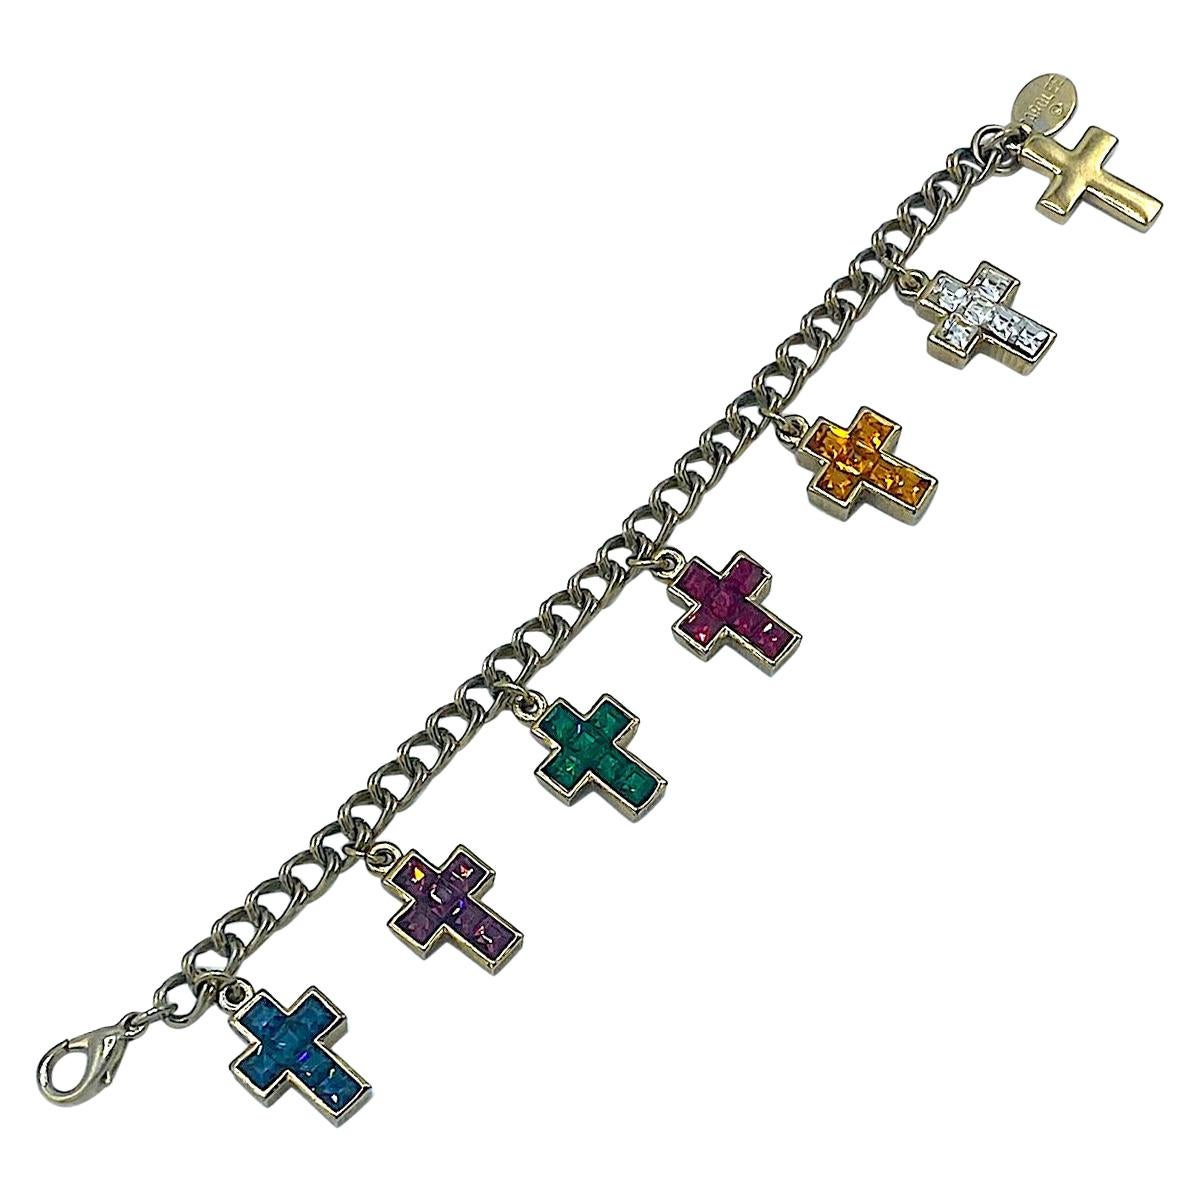 A charming replica of Wallace Simpson's, the Duchess of Windsor's, 1936 Cartier gold and jeweled cross charm bracelet by American fashion jewelry company Carolee. This pieces is gold plate with Swarovski rhinestones and an oval plaque inscribed